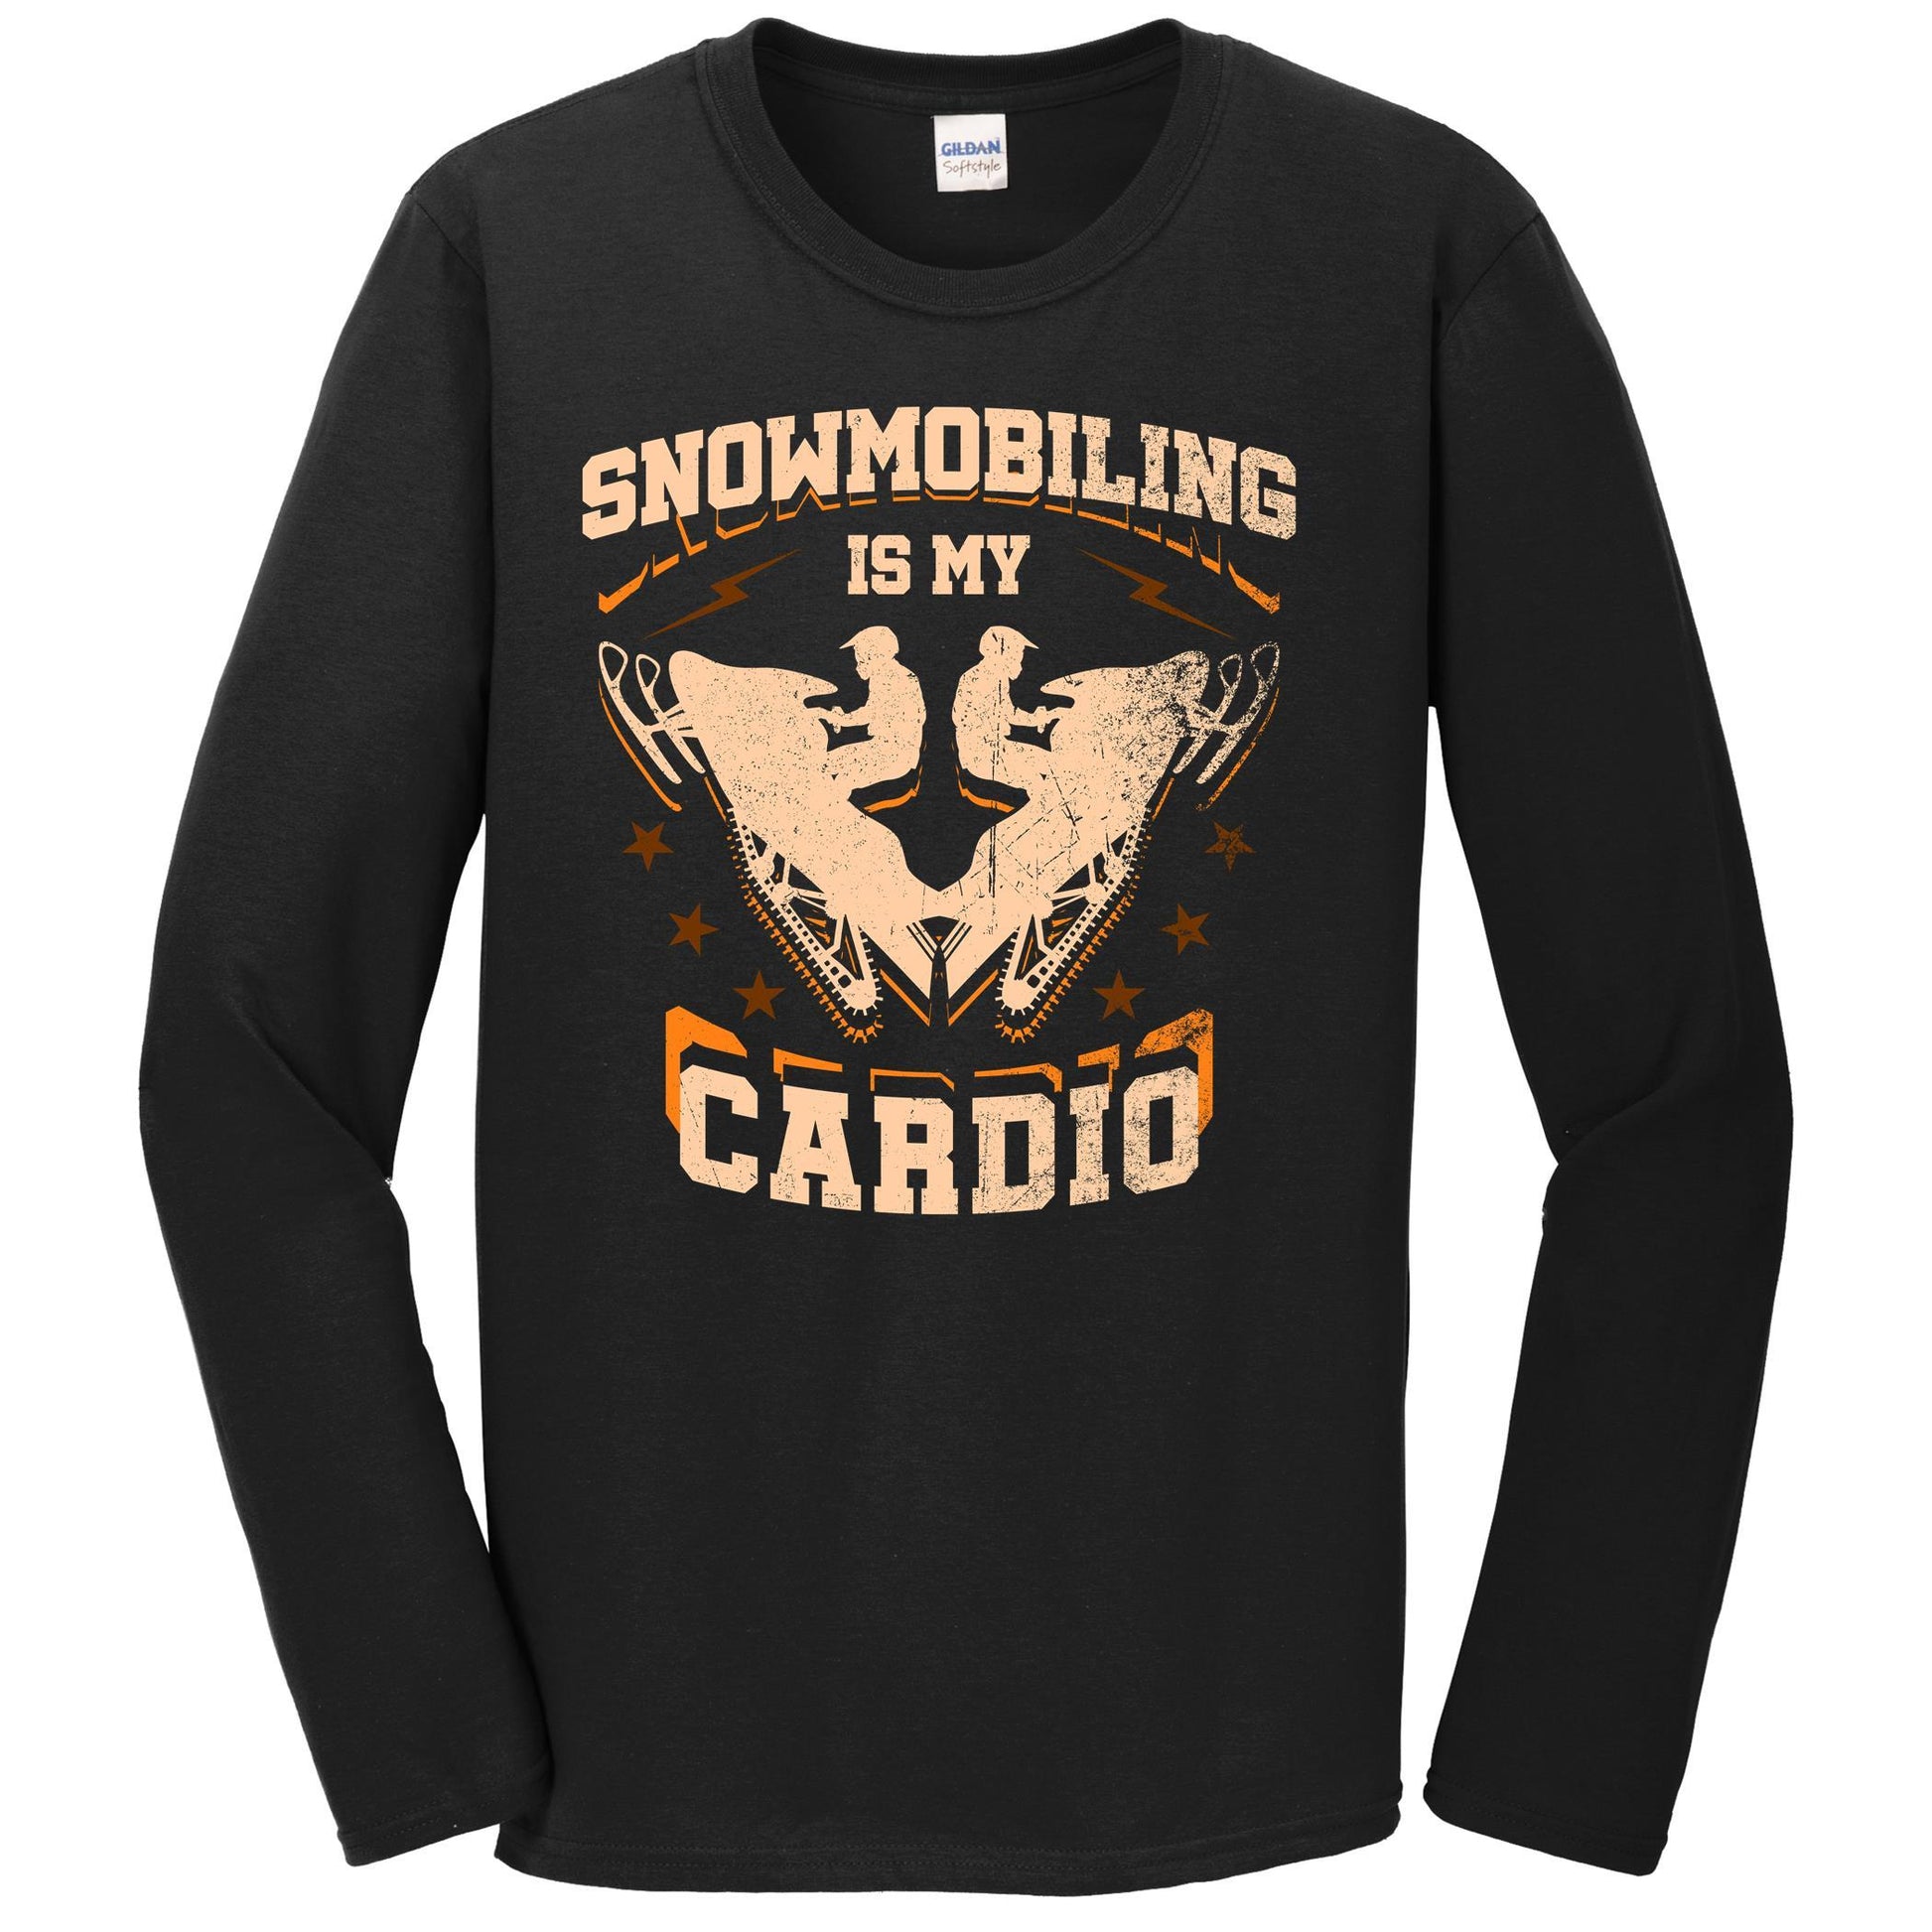 Snowmobiling Is My Cardio Funny Snowmobile Long Sleeve T-Shirt